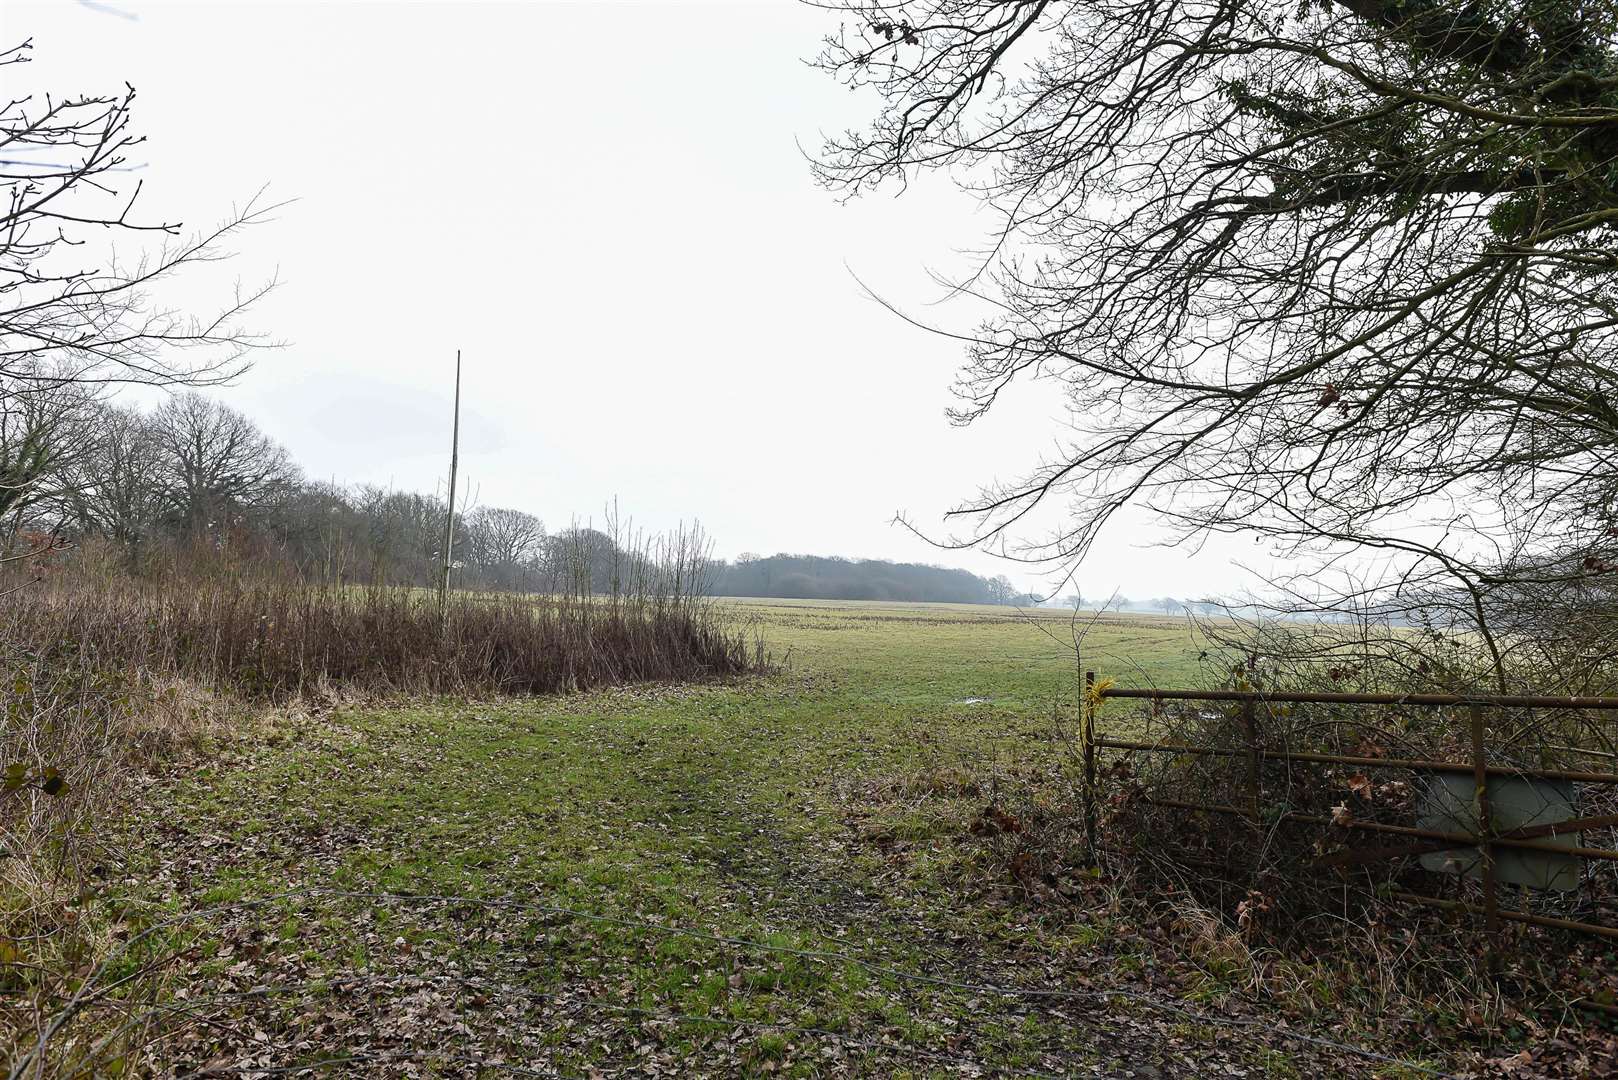 The field where the solar farm could be built